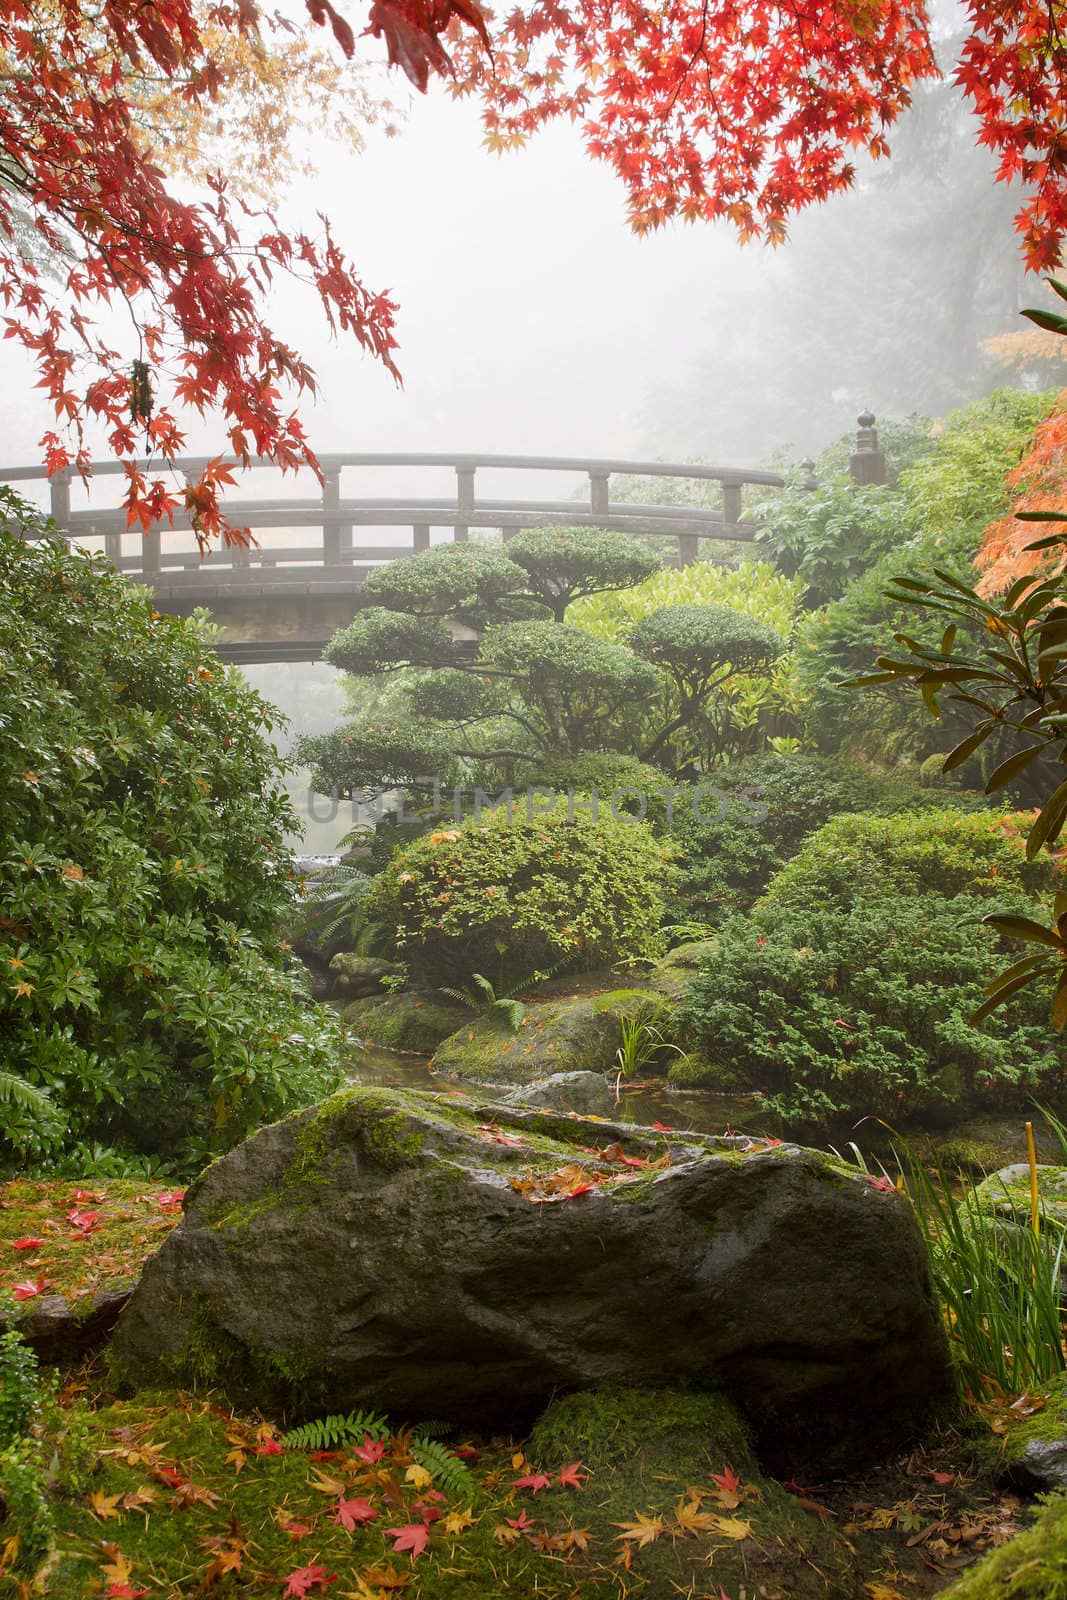 Rock and Bridge at Japanese Garden by jpldesigns